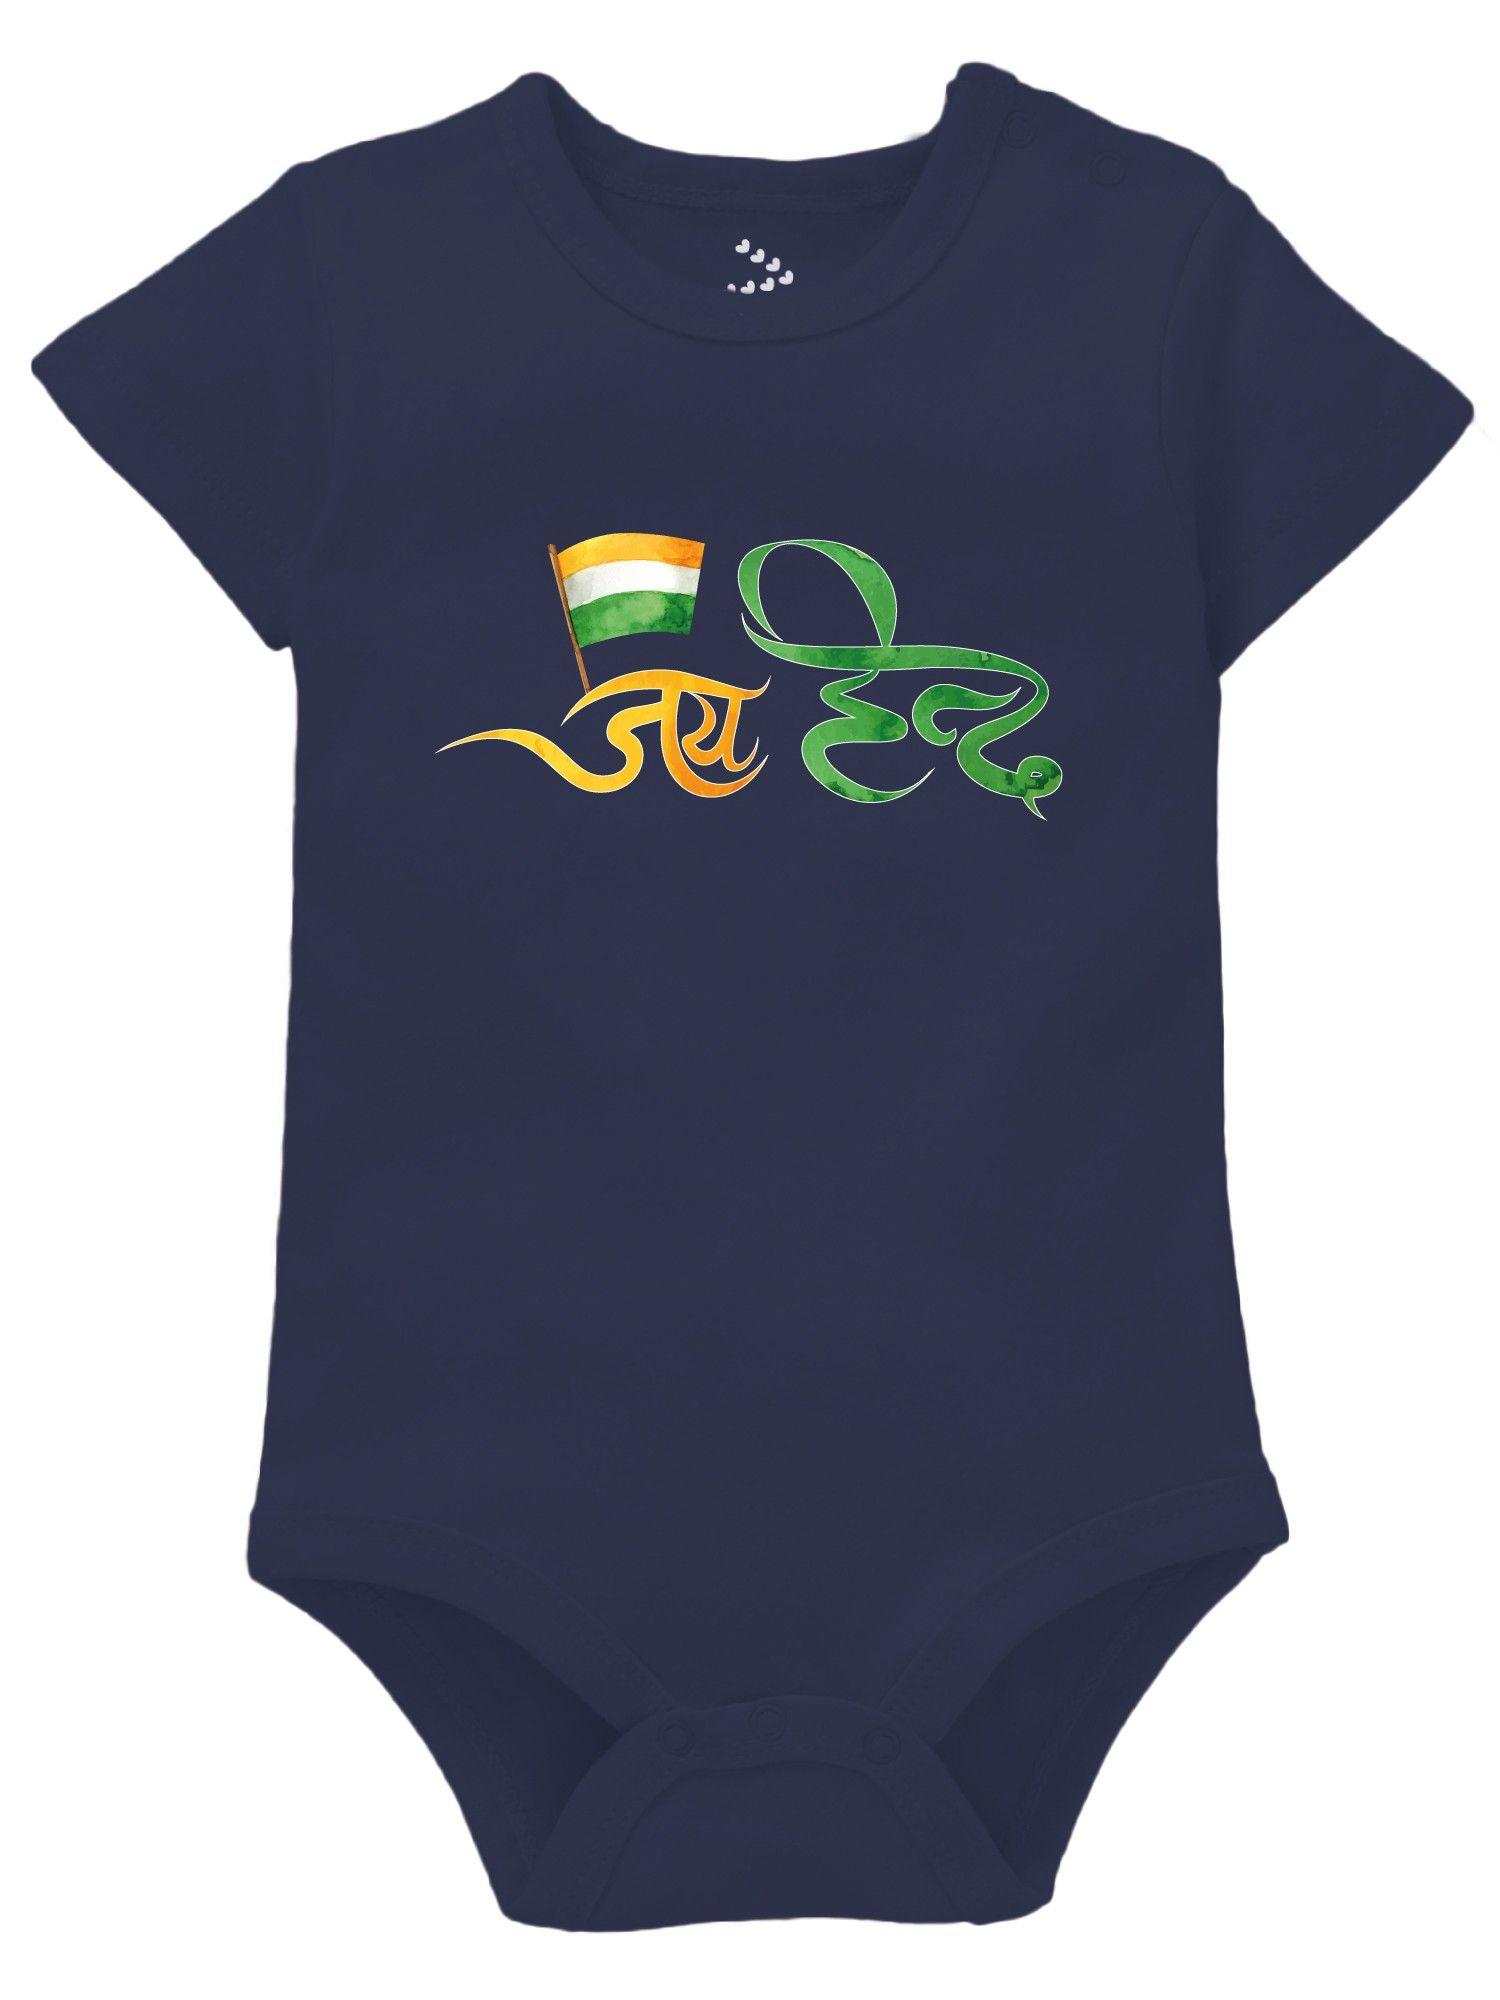 jay hind cotton independence/republic theme onesies